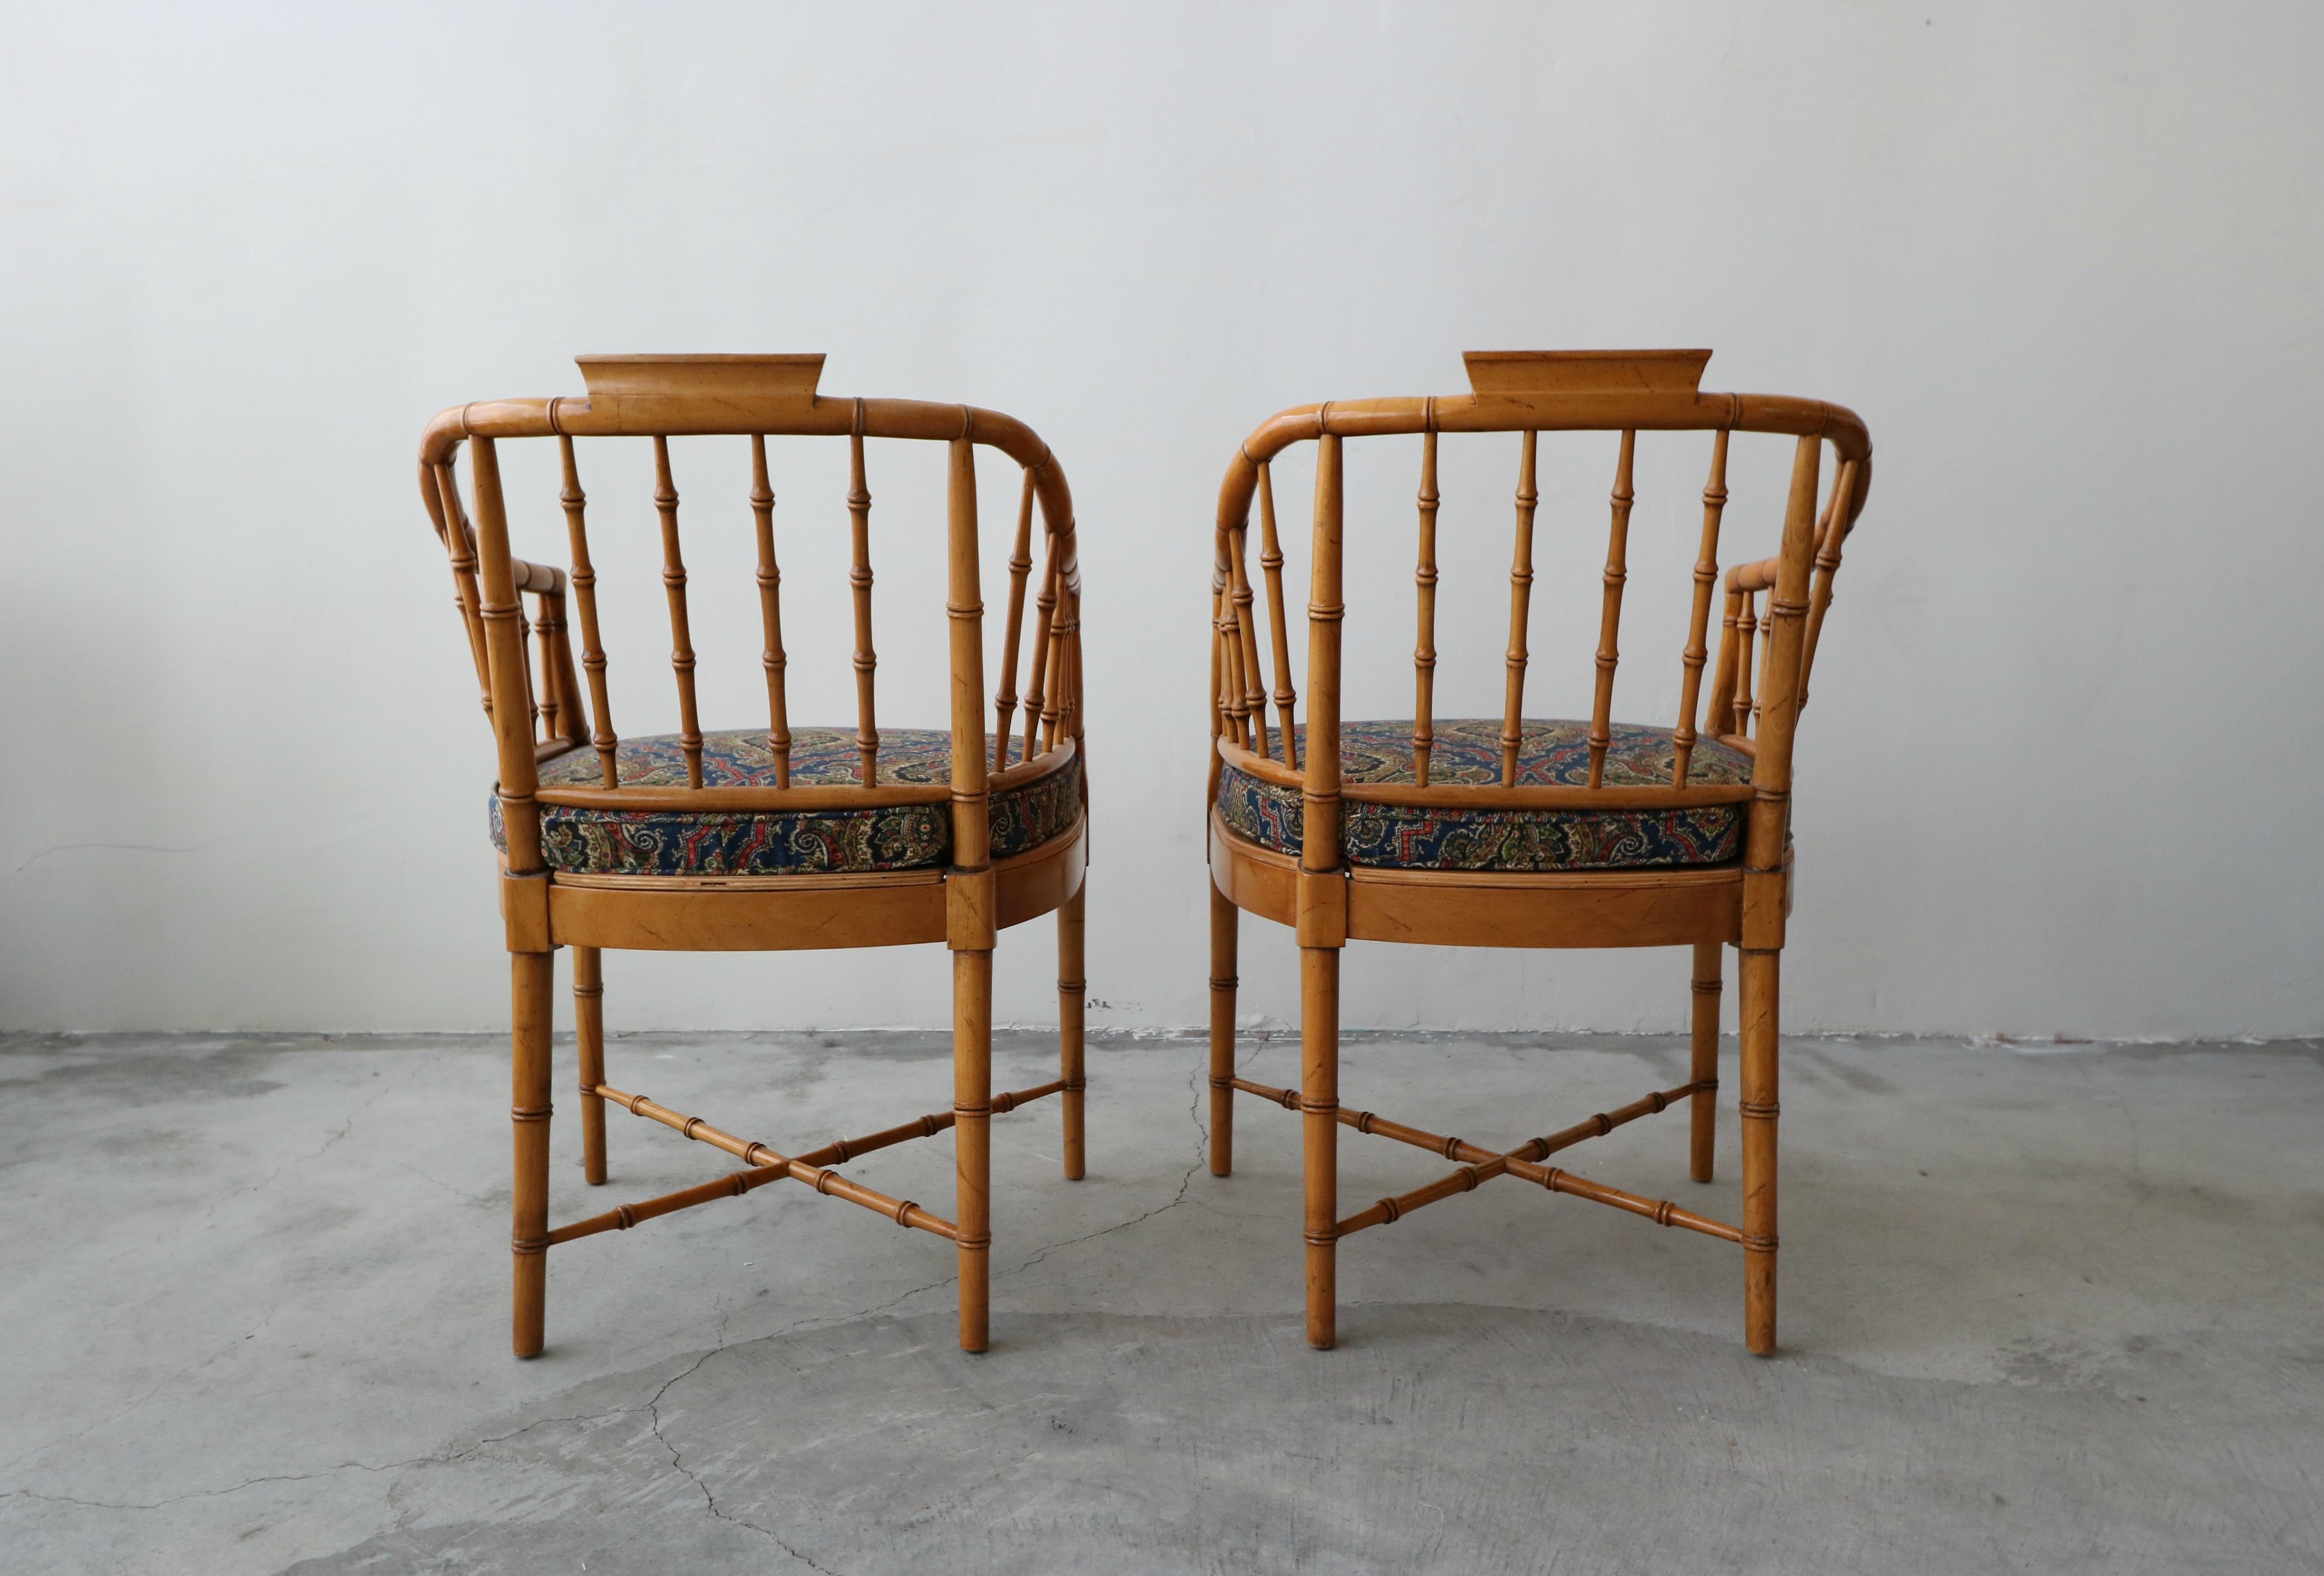 Pair of Vintage Bamboo Regency Chippendale Chinoiserie Style Side Accent Chairs (20. Jahrhundert)